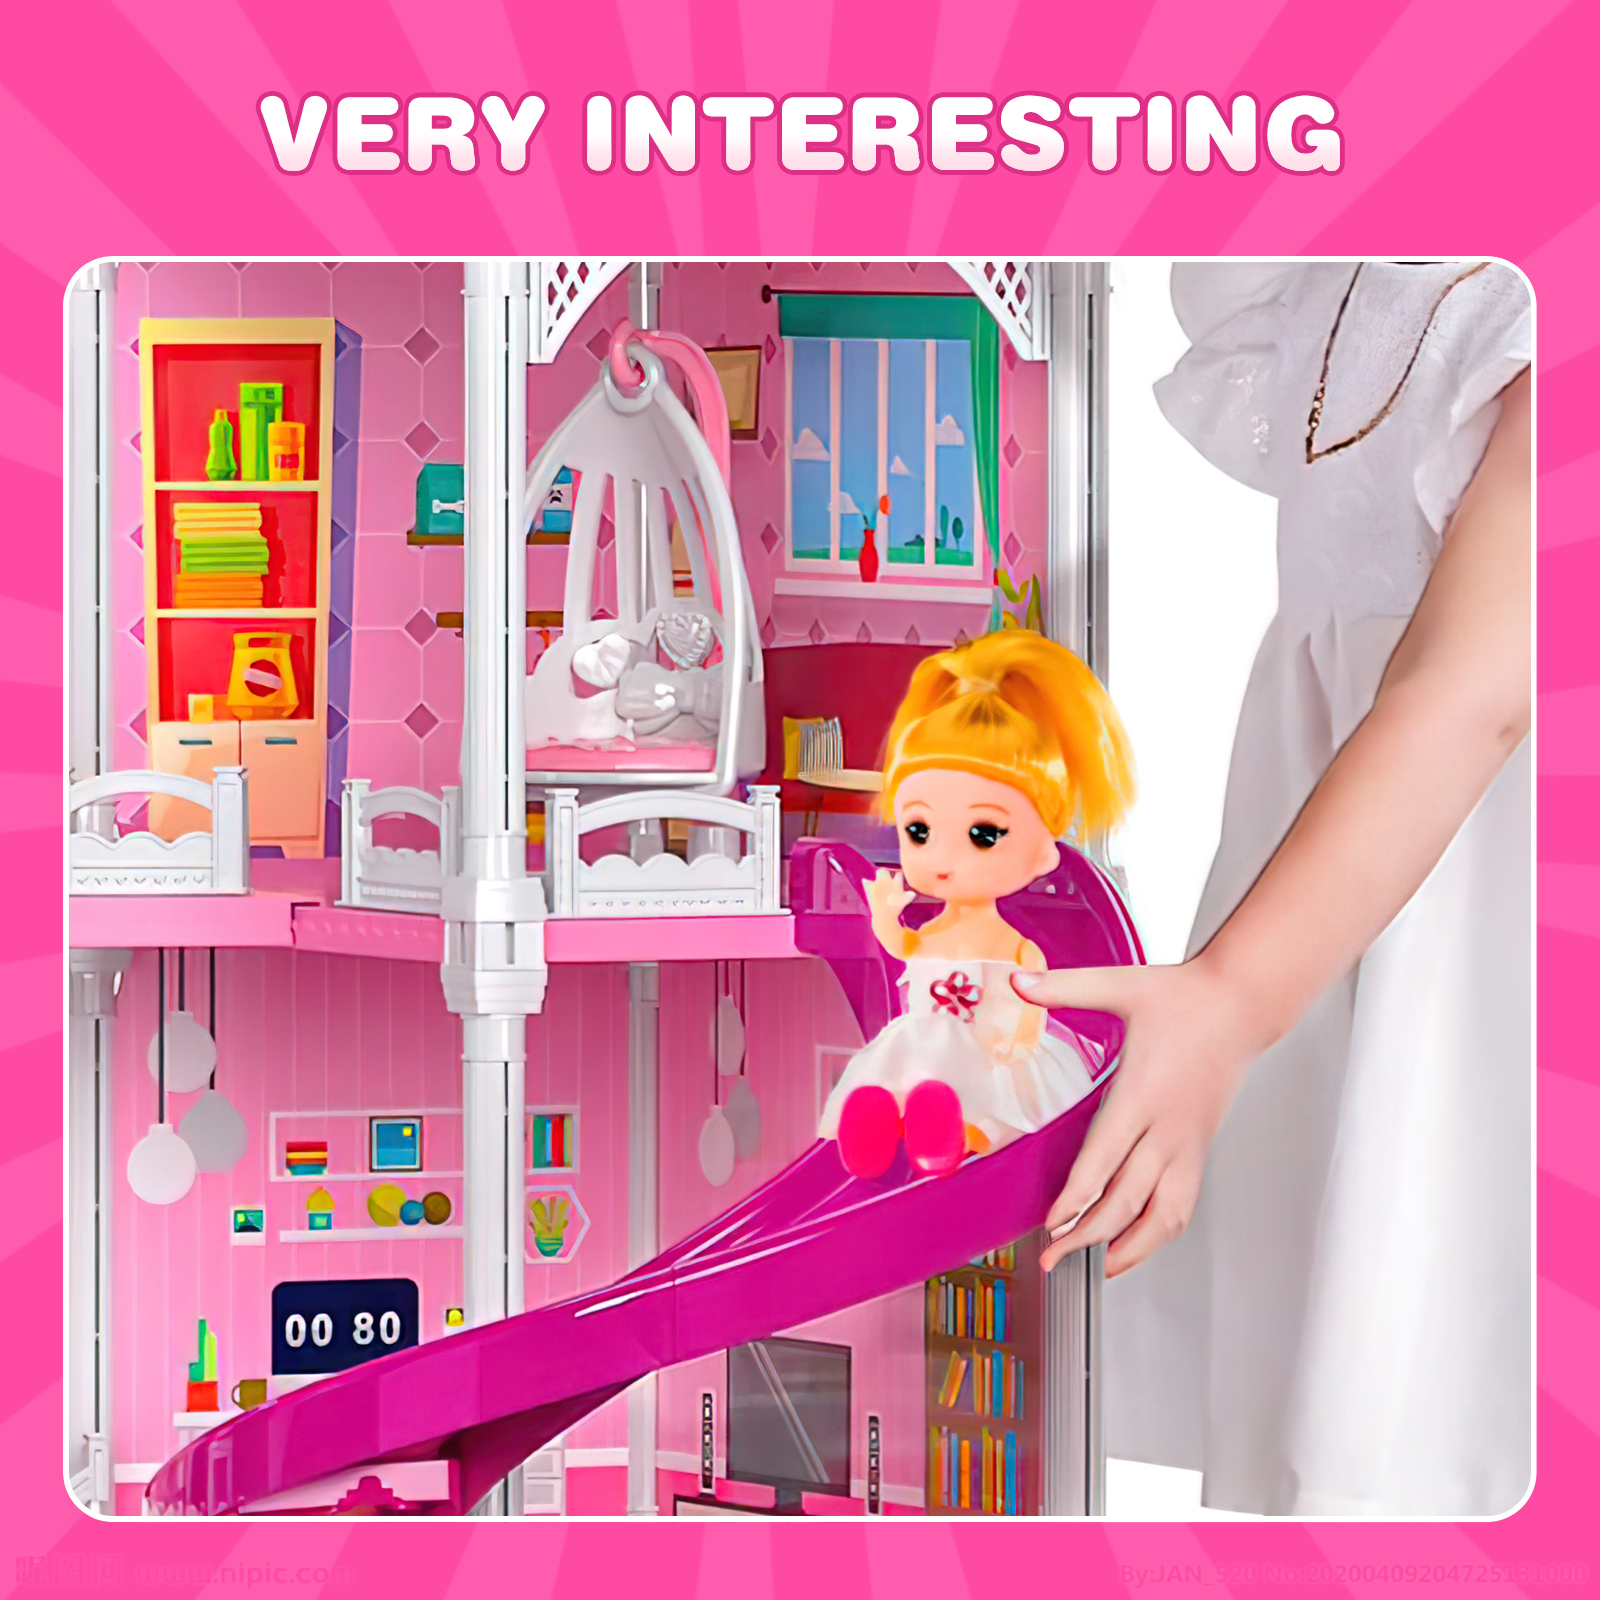 Hot Bee Dollhouse for Girls,4-Story 12 Rooms Playhouse with 2 Dolls Toy Figures,Pretend Dreamhouse with Accessories,Gift Toy for Kids Ages 3 4 5 6 - image 4 of 7